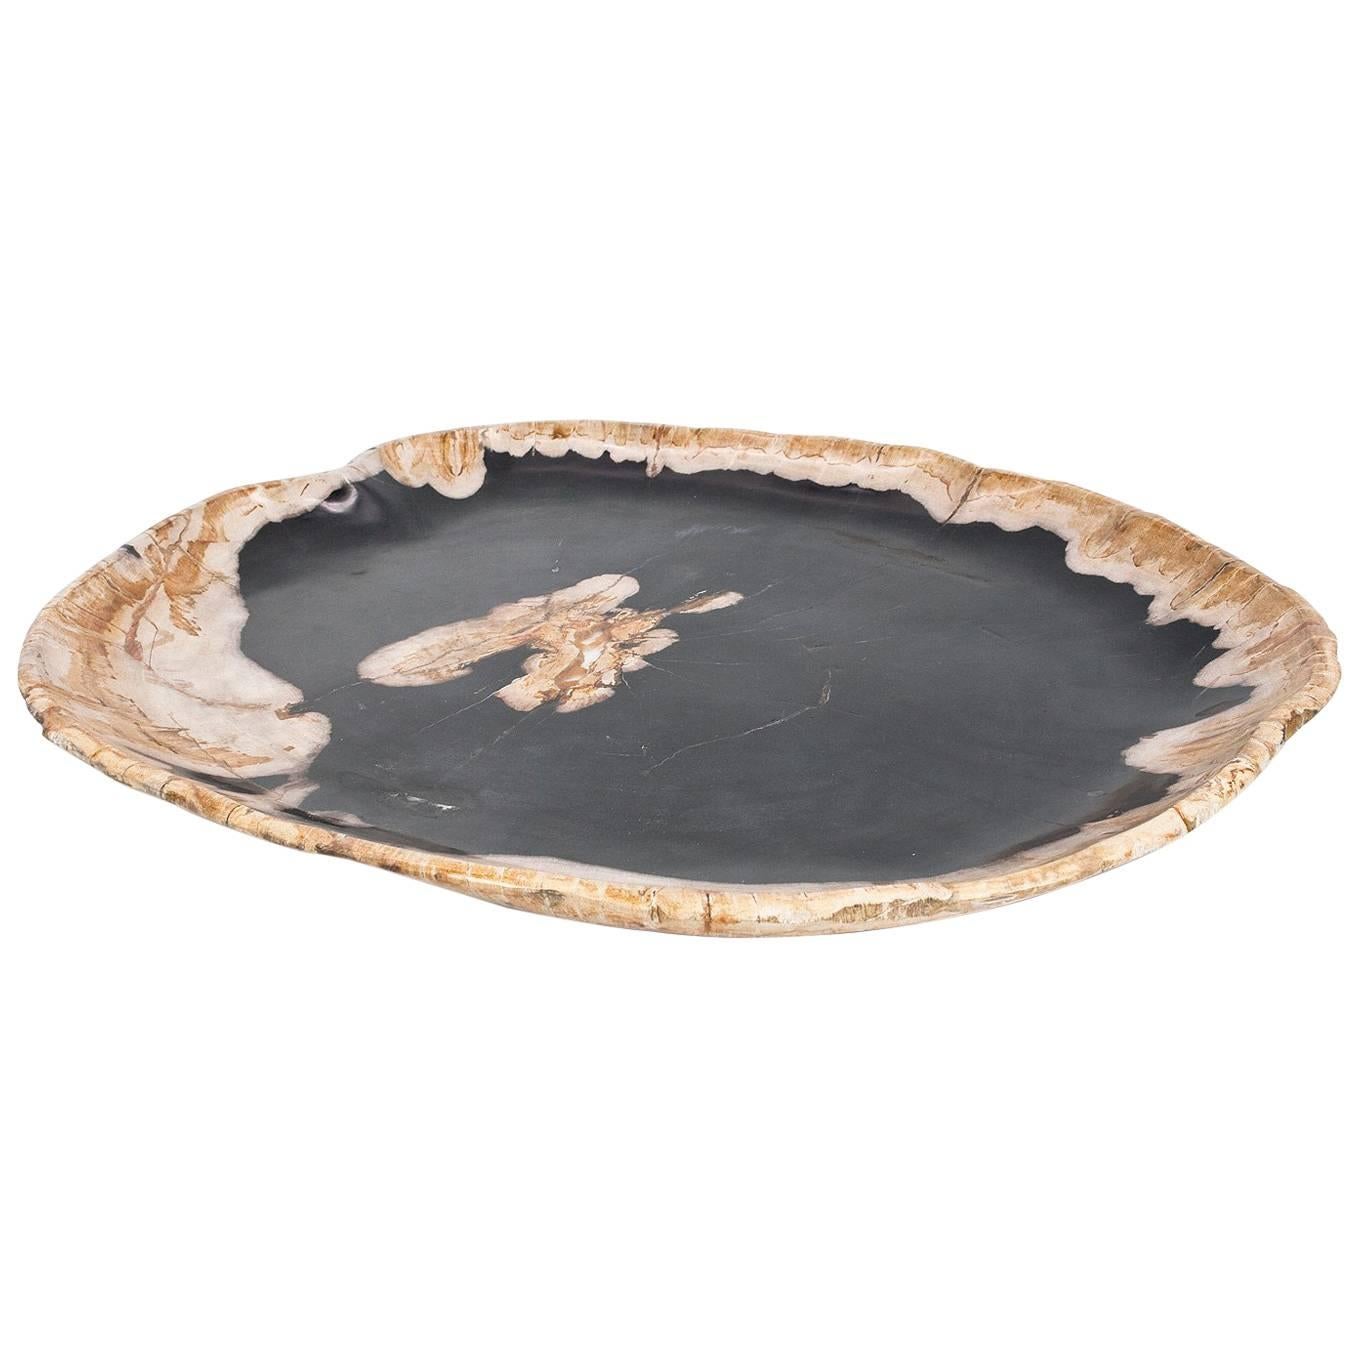 Large Petrified Wood Plate or Platte Home Accessory of Organic Origin